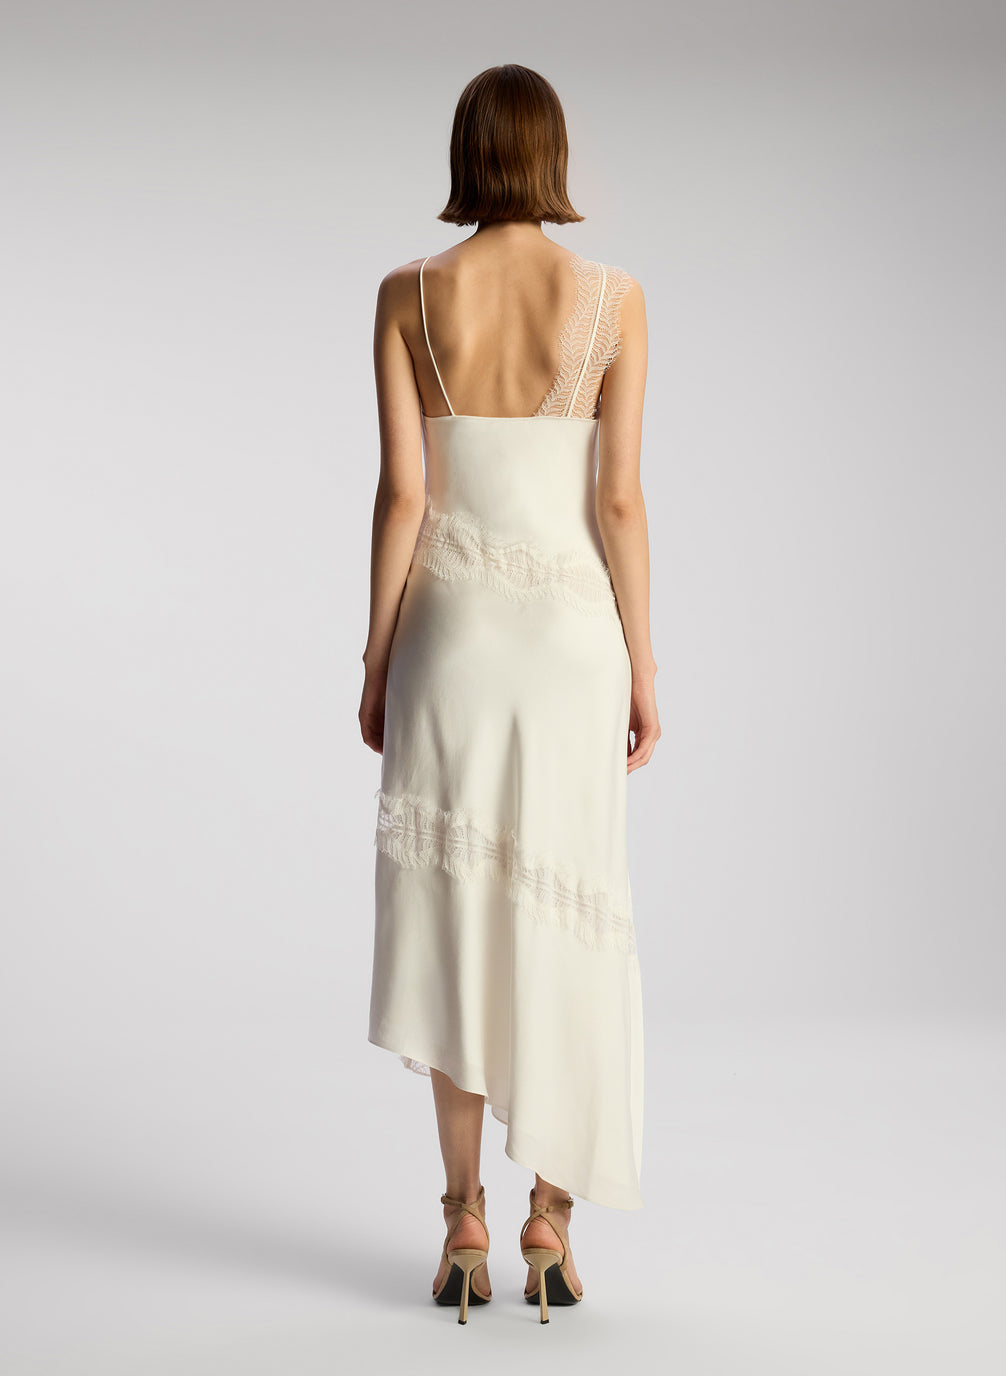 back view of woman wearing off white lace trimmed midi dress